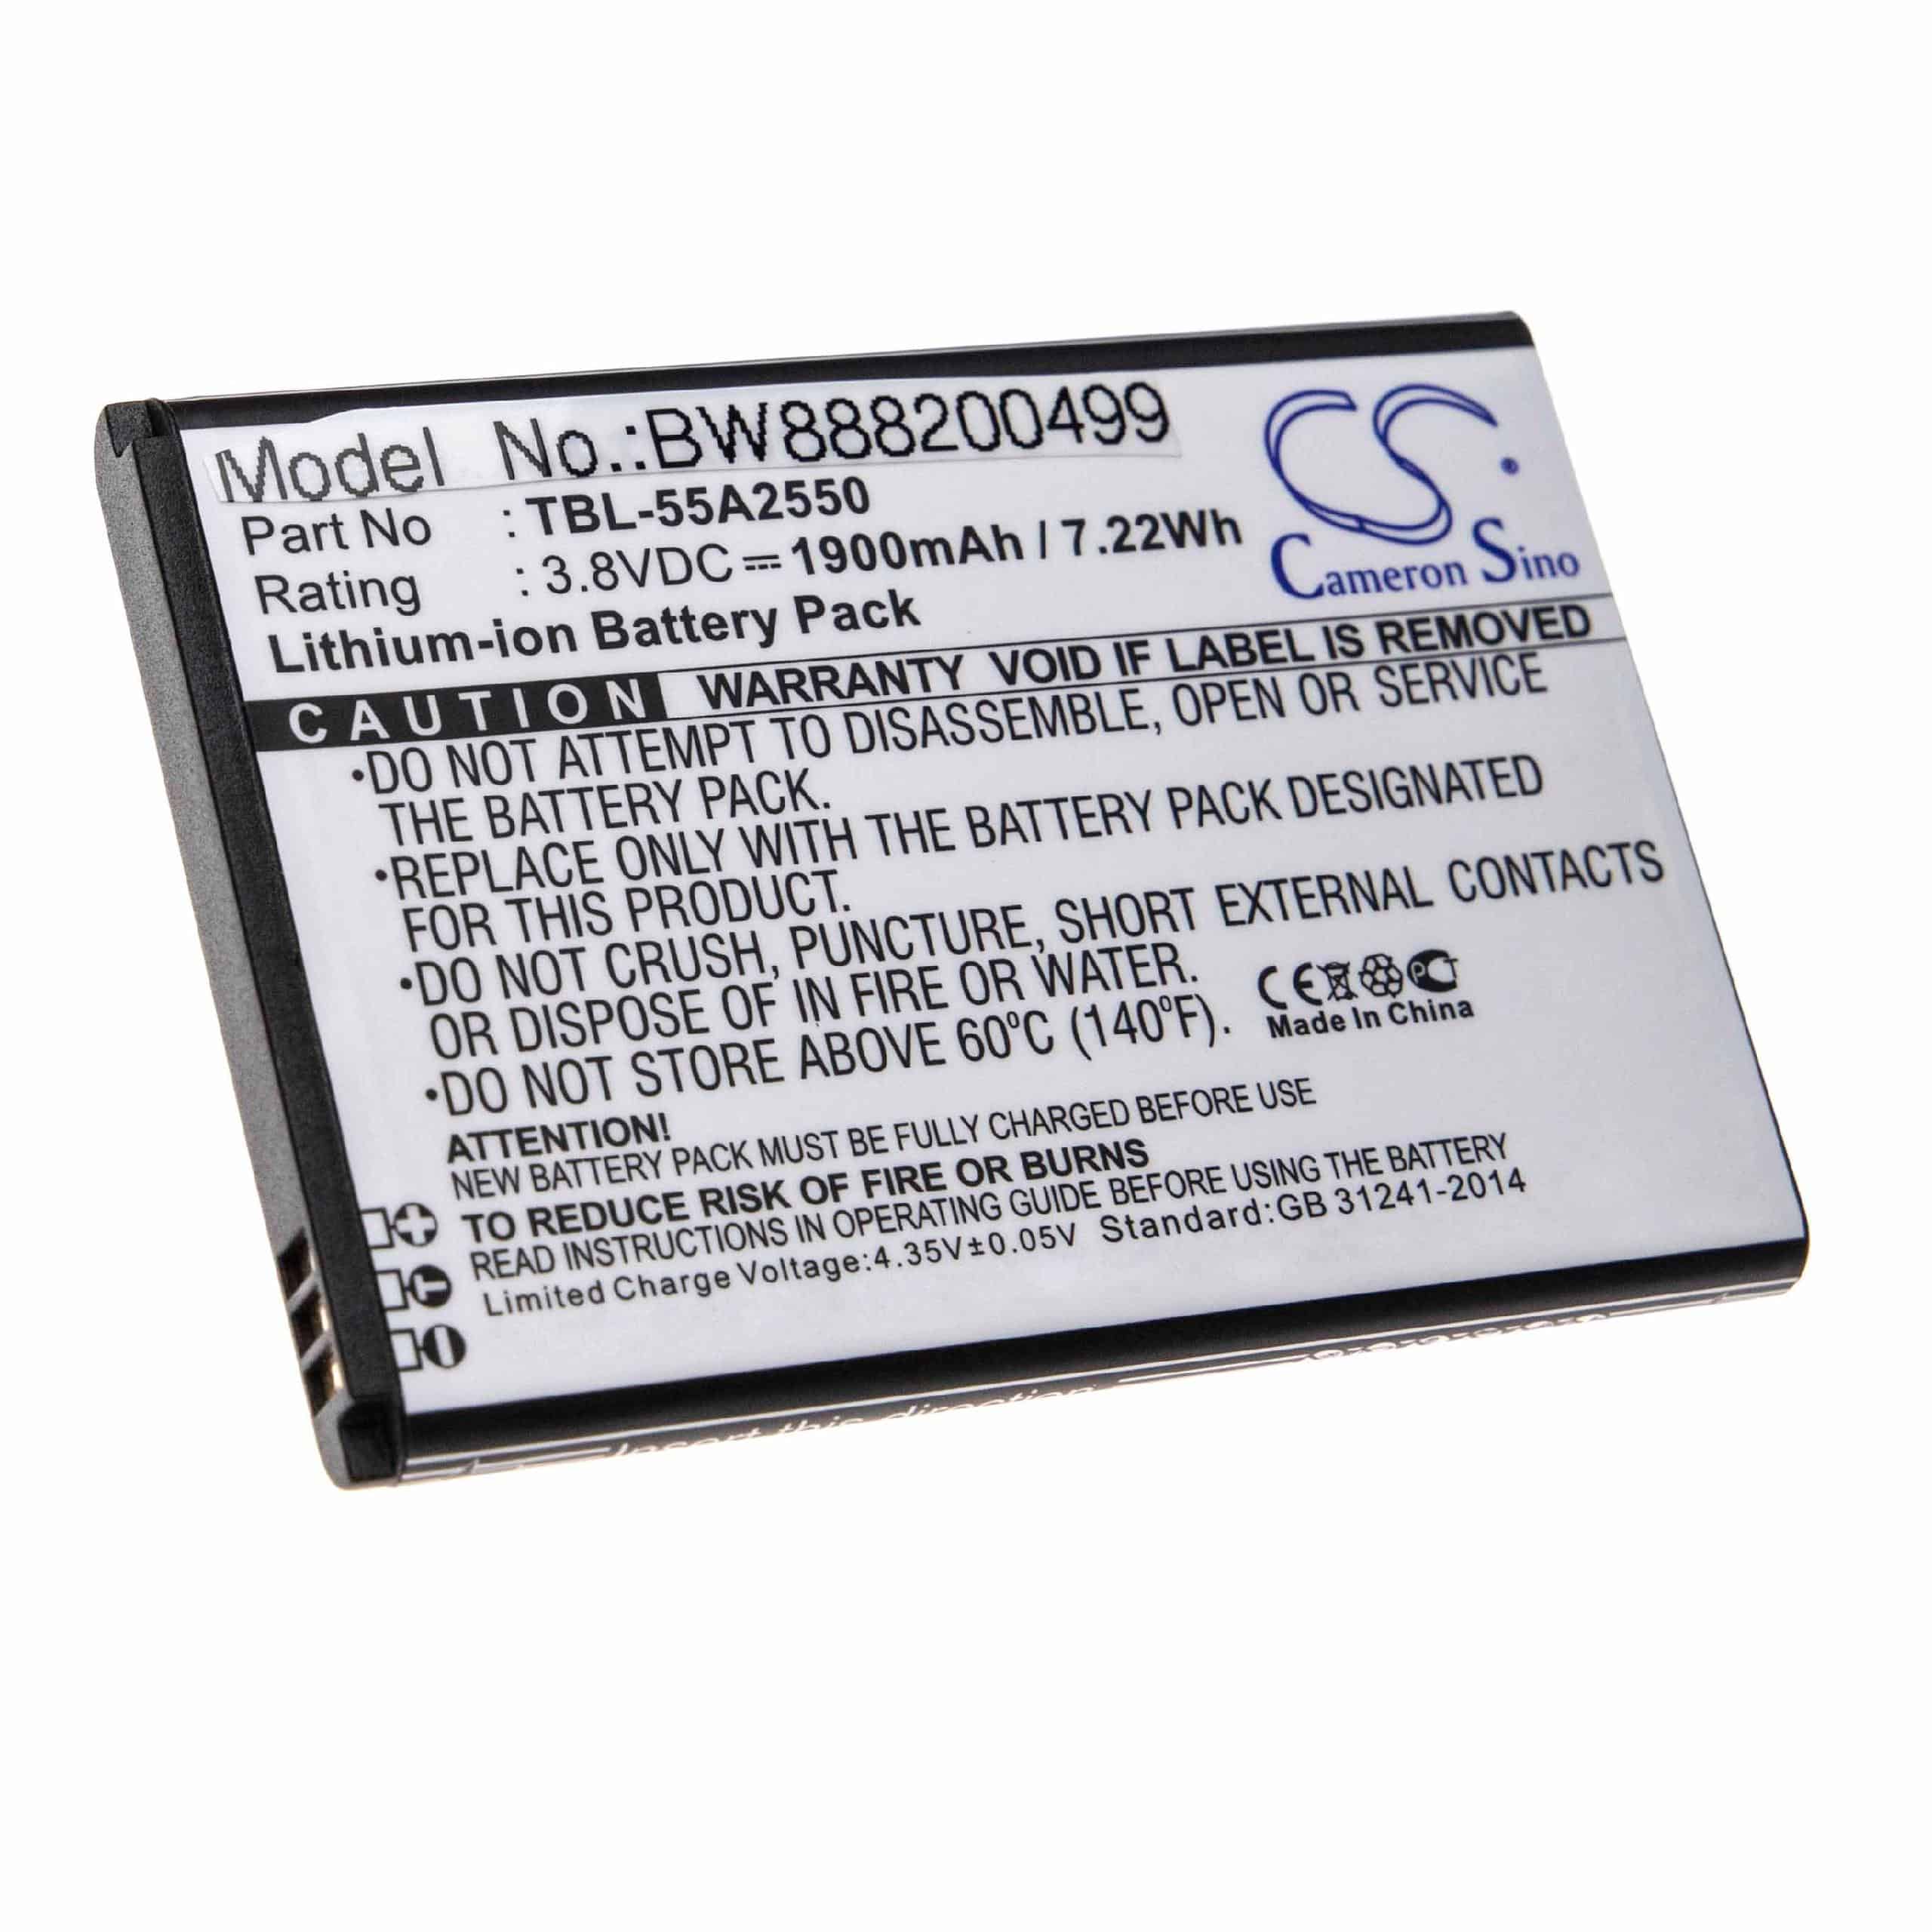 Mobile Router Battery Replacement for TP-Link TBL-55A2550 - 1900mAh 3.8V Li-Ion